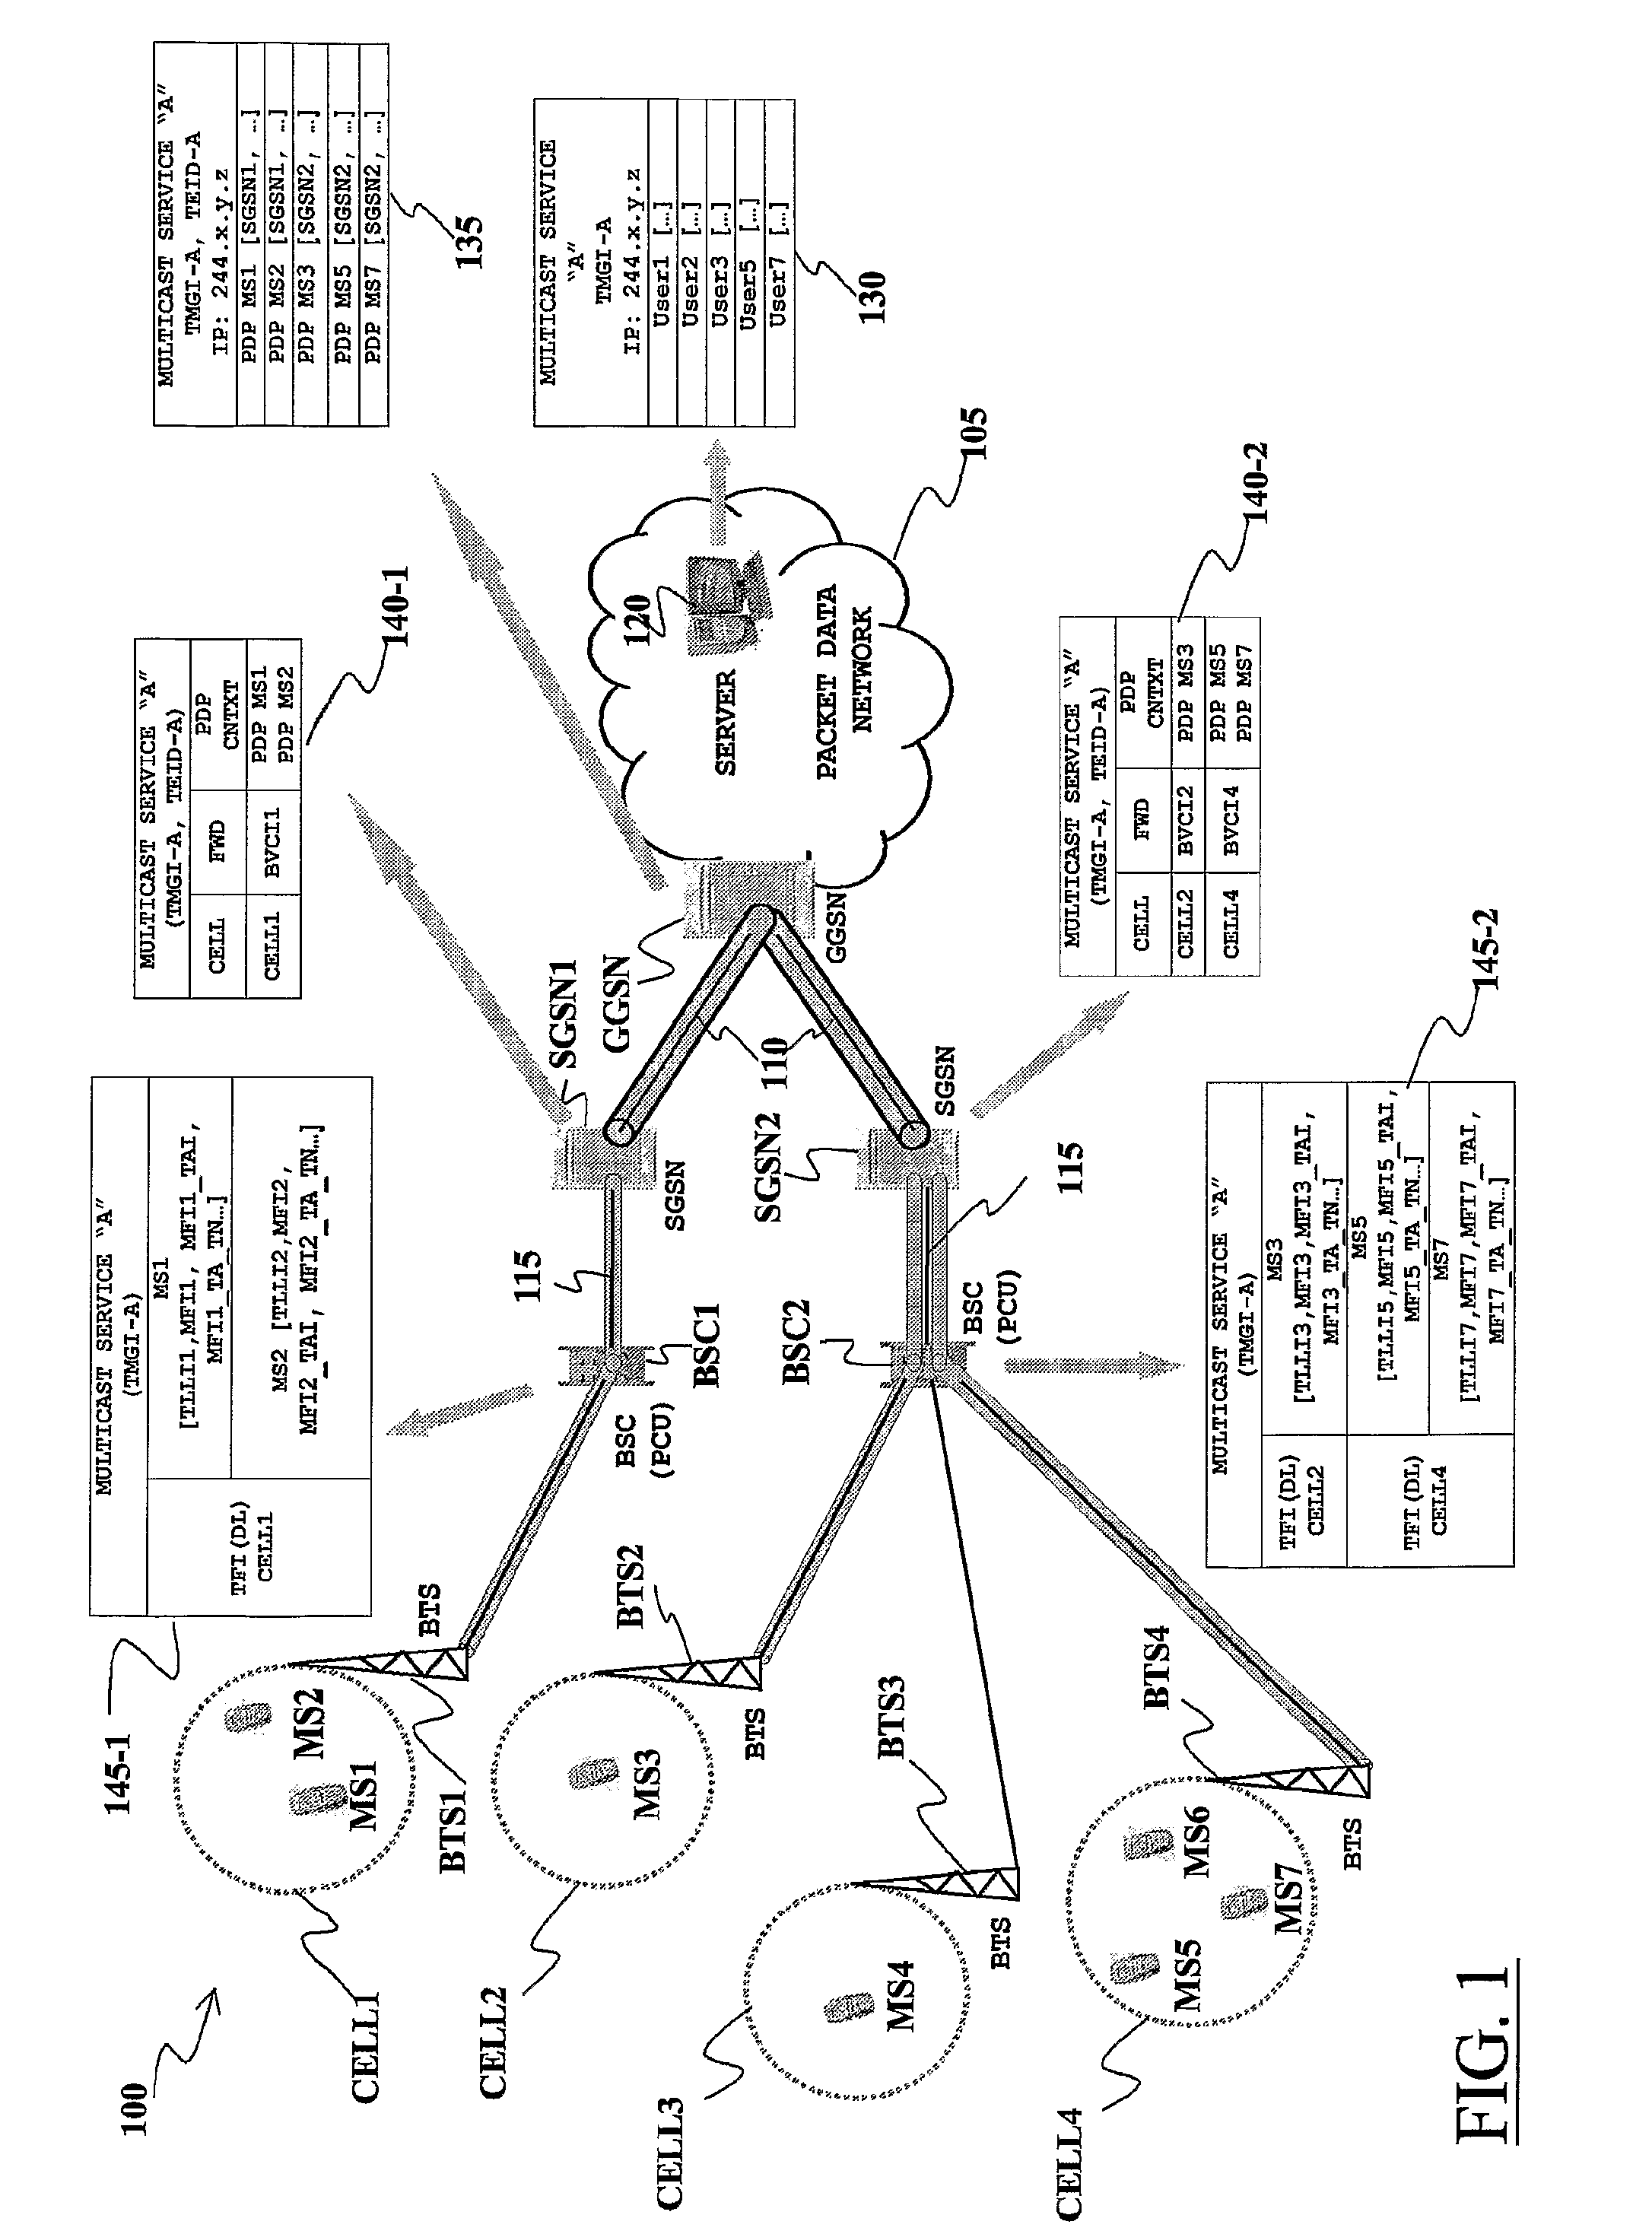 Method and system for distributing multimedia contents through a wireless communications network, particularly a mobile telephony network